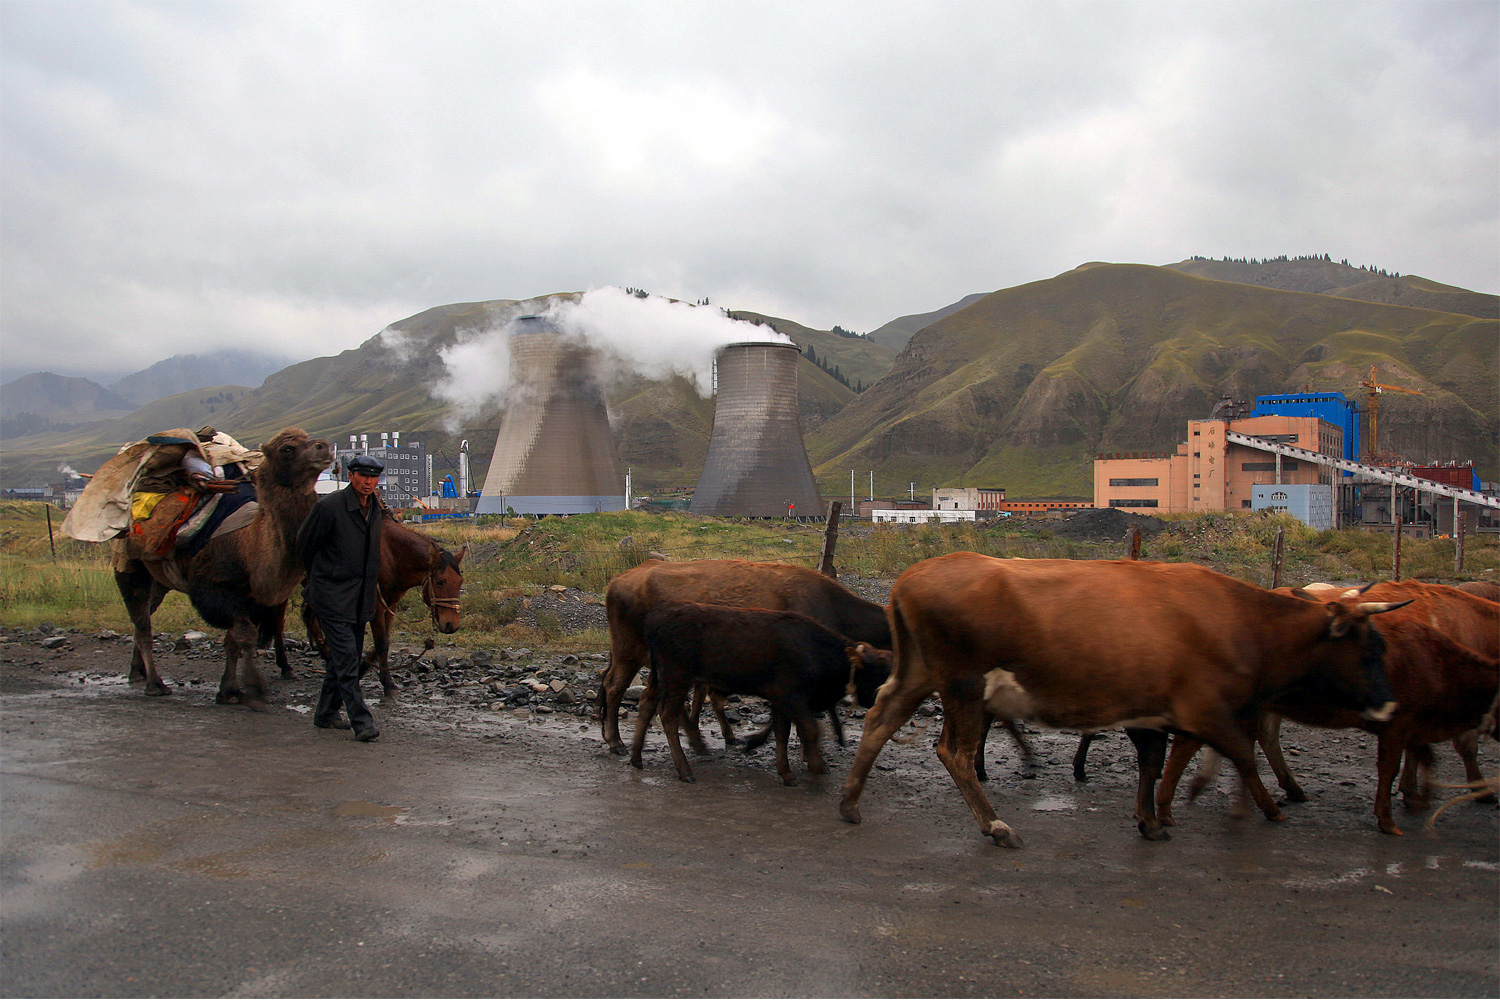 Polluting industry at the headwaters of the Urumqi River in Xinjiang. Photo by Yang Yong.